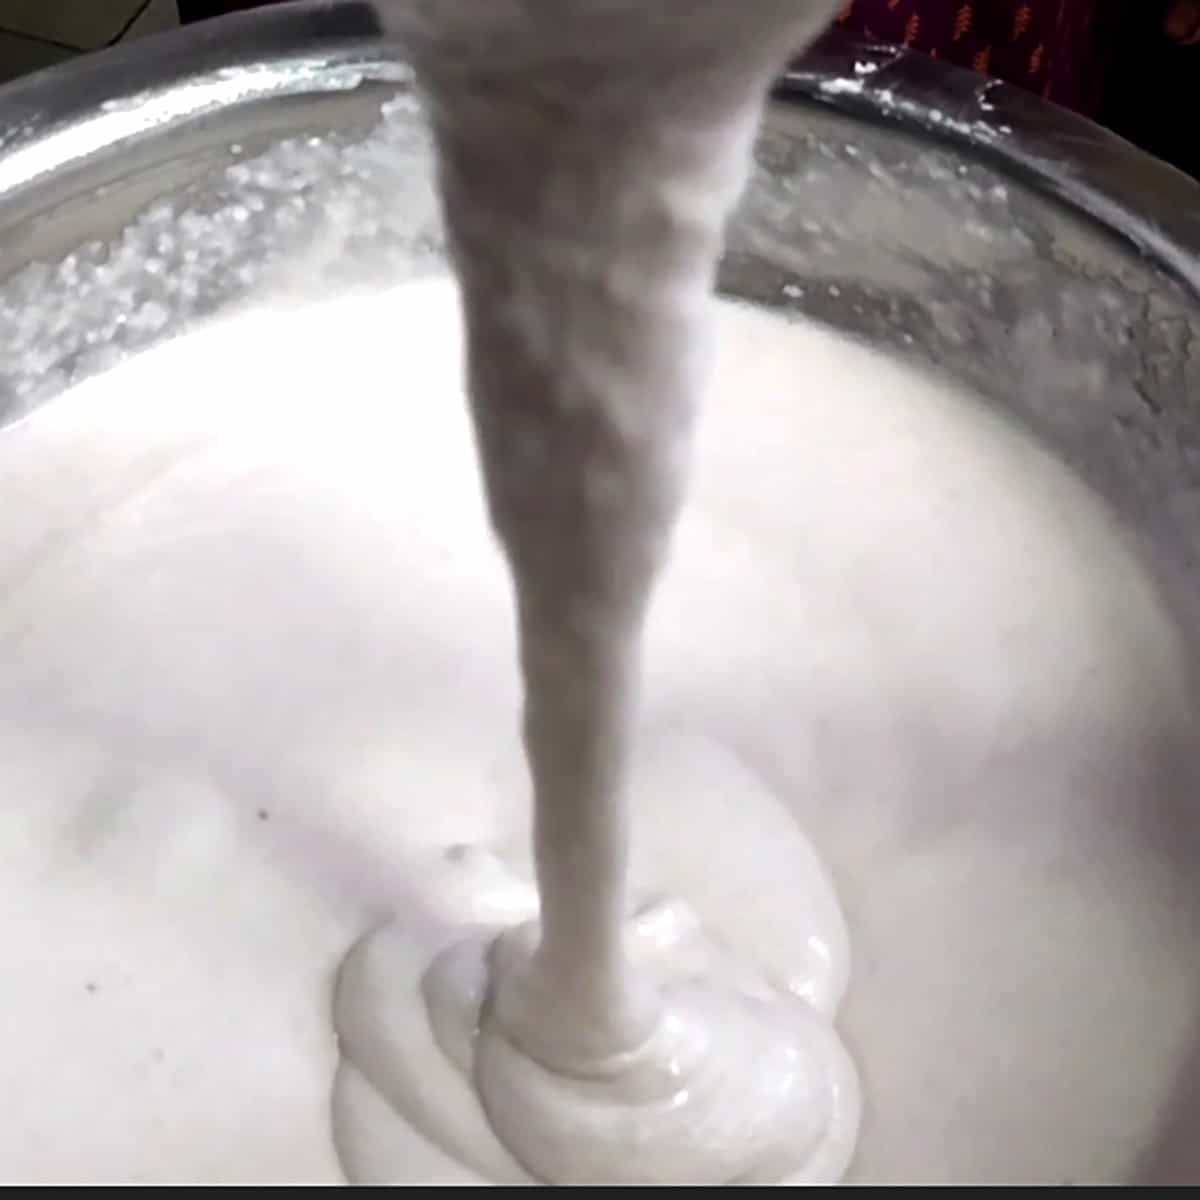 Showing the perfect soft idli batter consistency before fermentation.